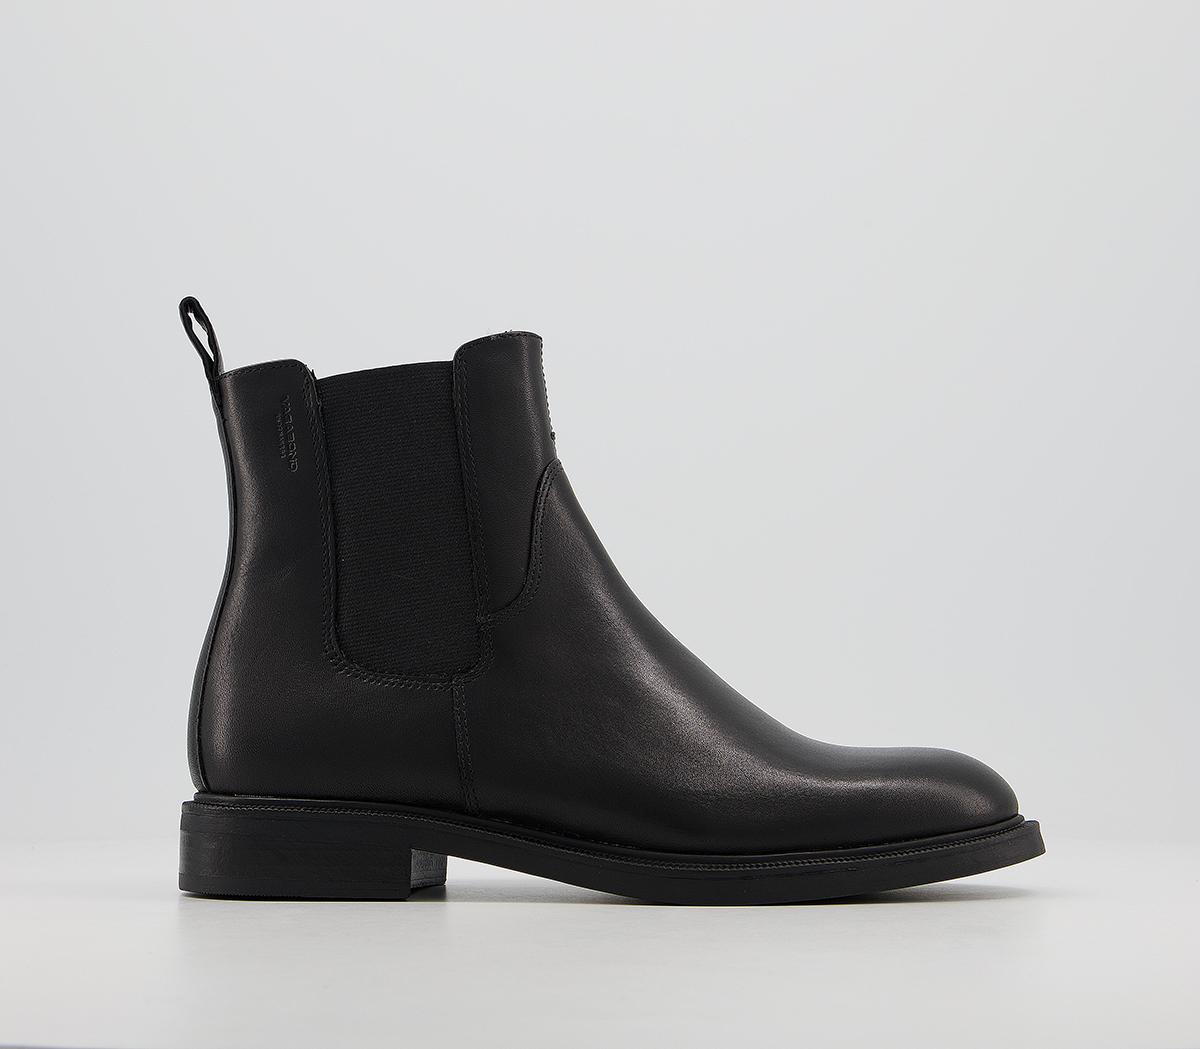 Vagabond Shoemakers Amina Chelsea Boot Black - Women's Ankle Boots